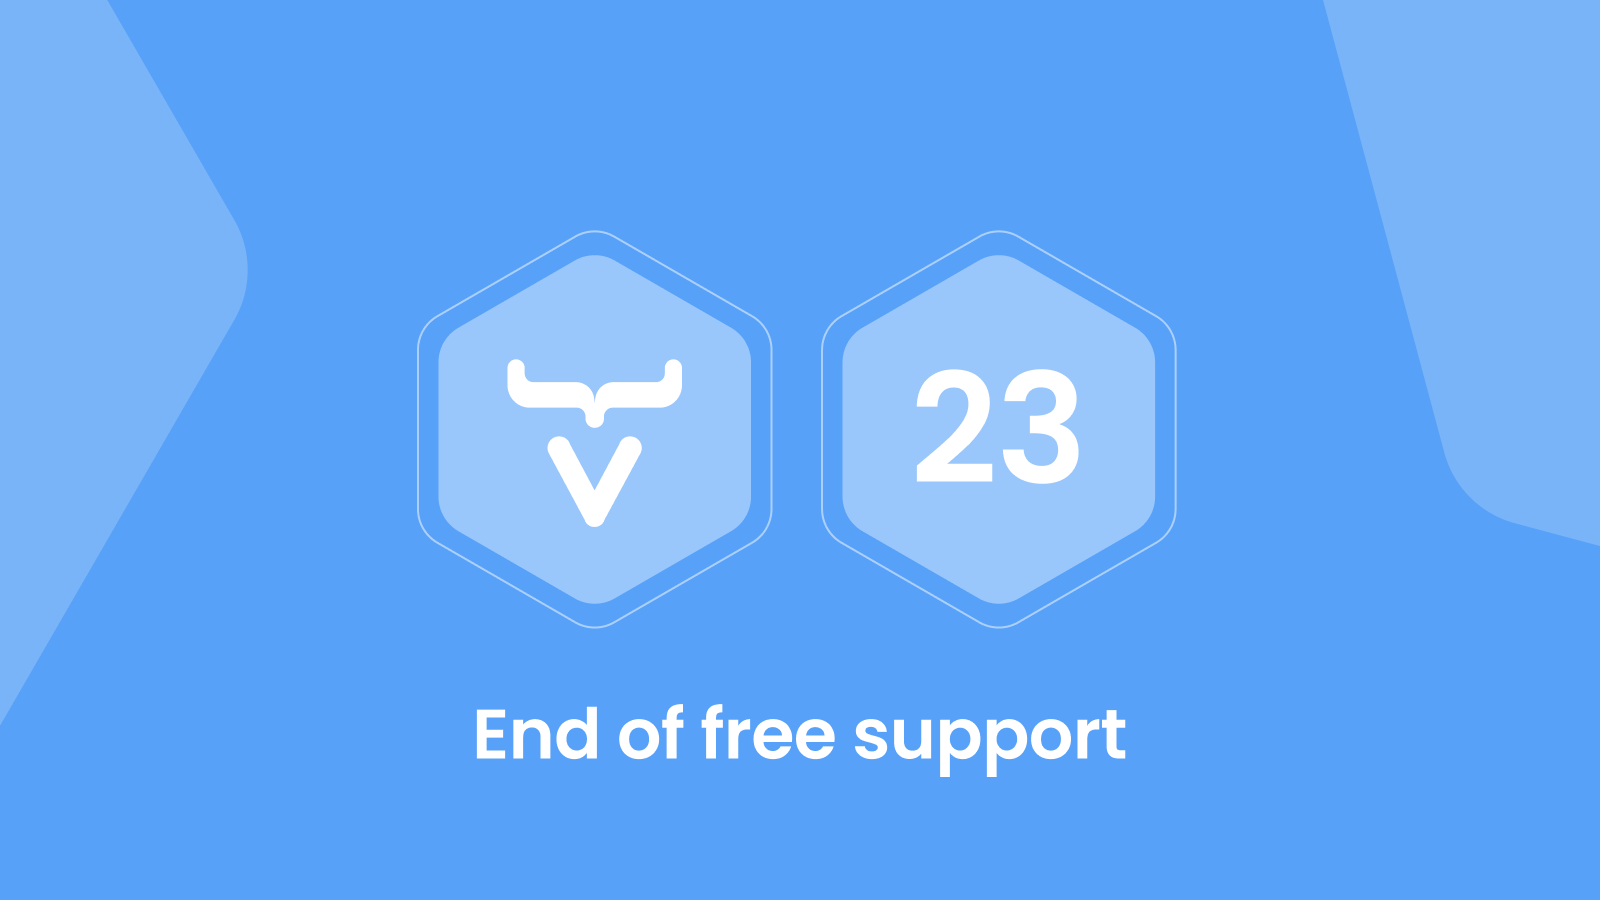 Free support for Vaadin 23 is coming to an end. Here's how to move forward. 